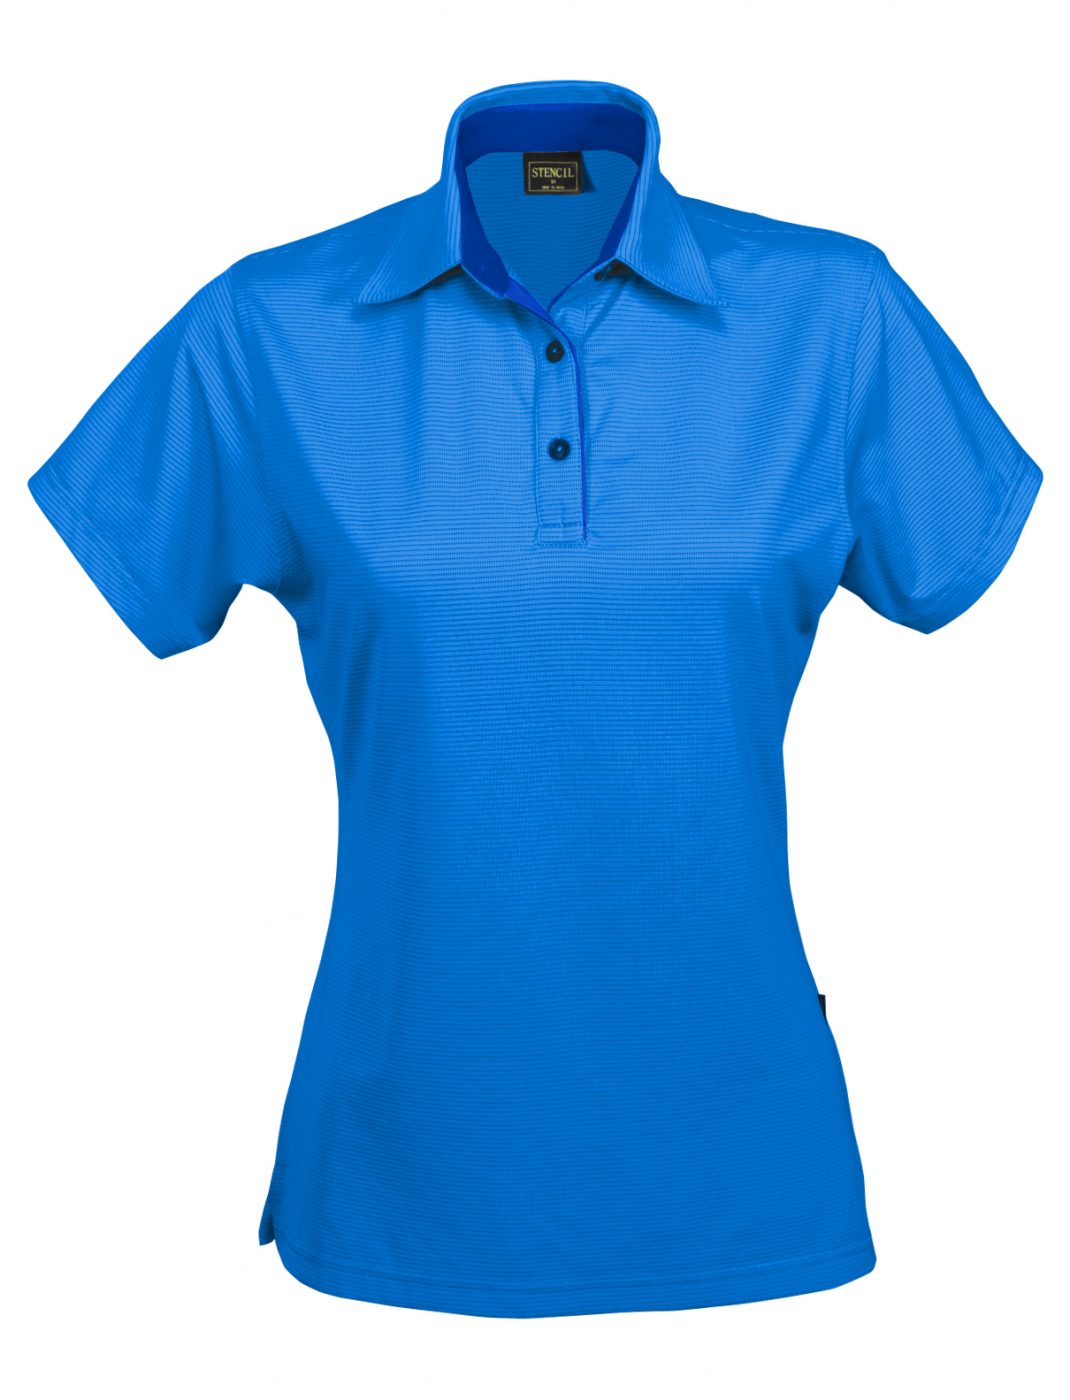 Stencil Silvertech polo shirt - Paddywack Promotional Products